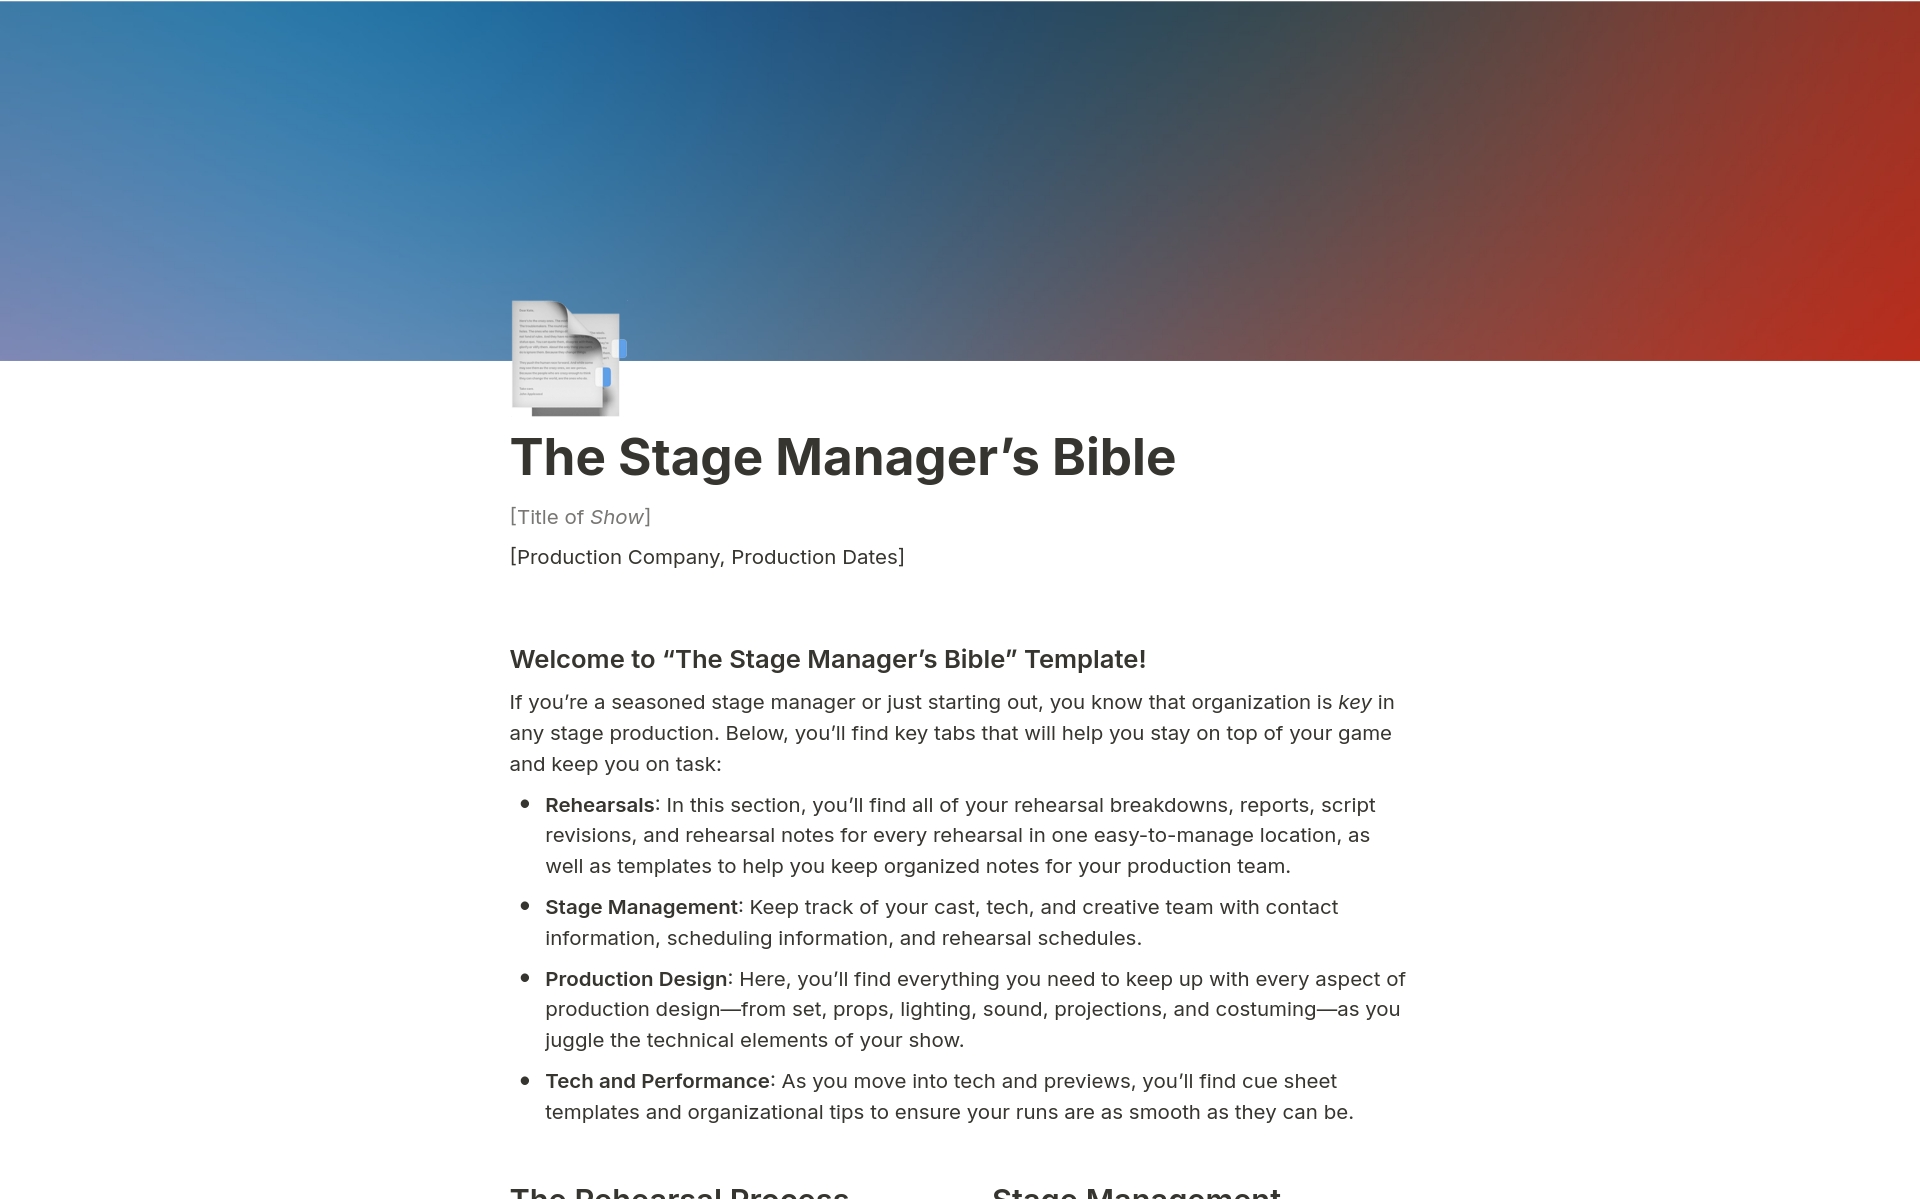 A template preview for The Stage Manager's Bible